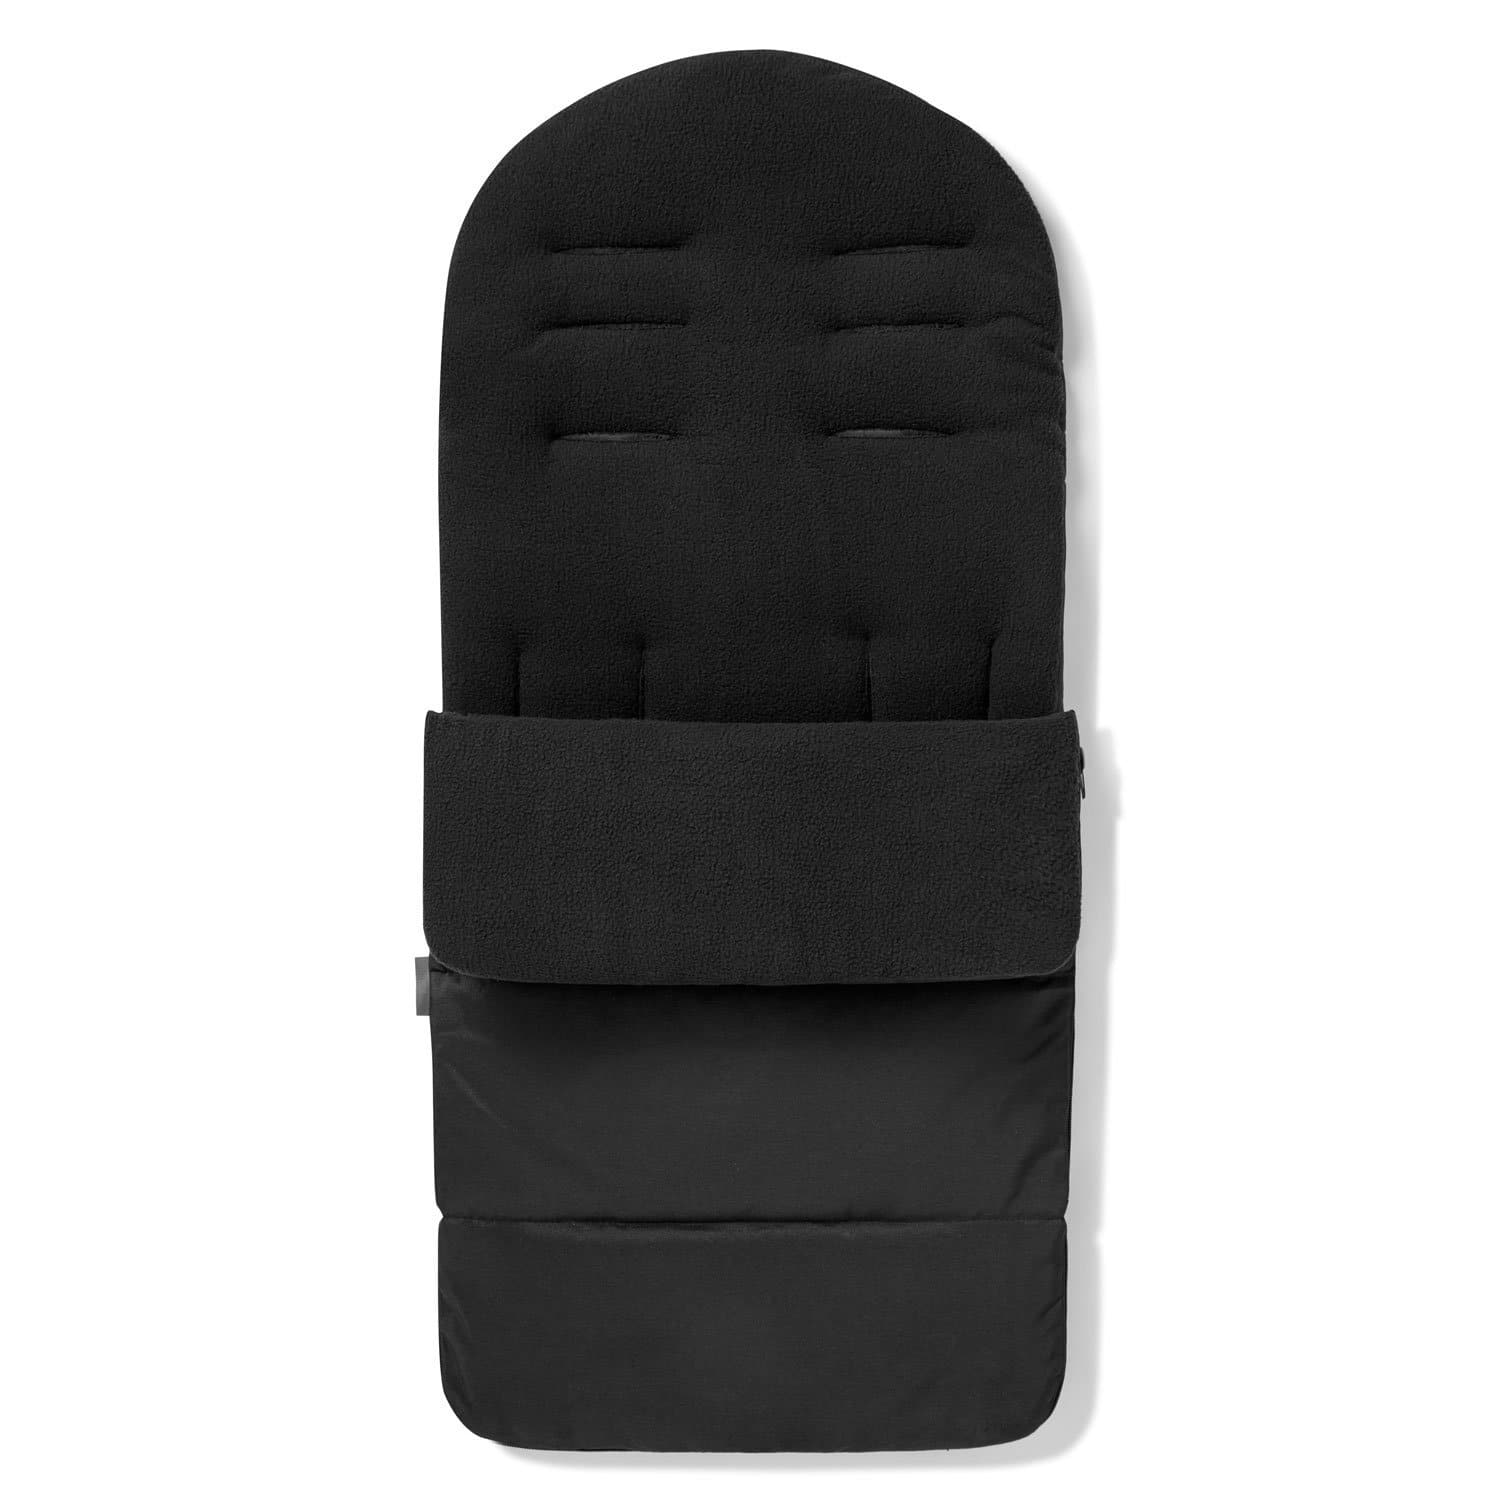 Premium Footmuff / Cosy Toes Compatible with Babystyle - For Your Little One